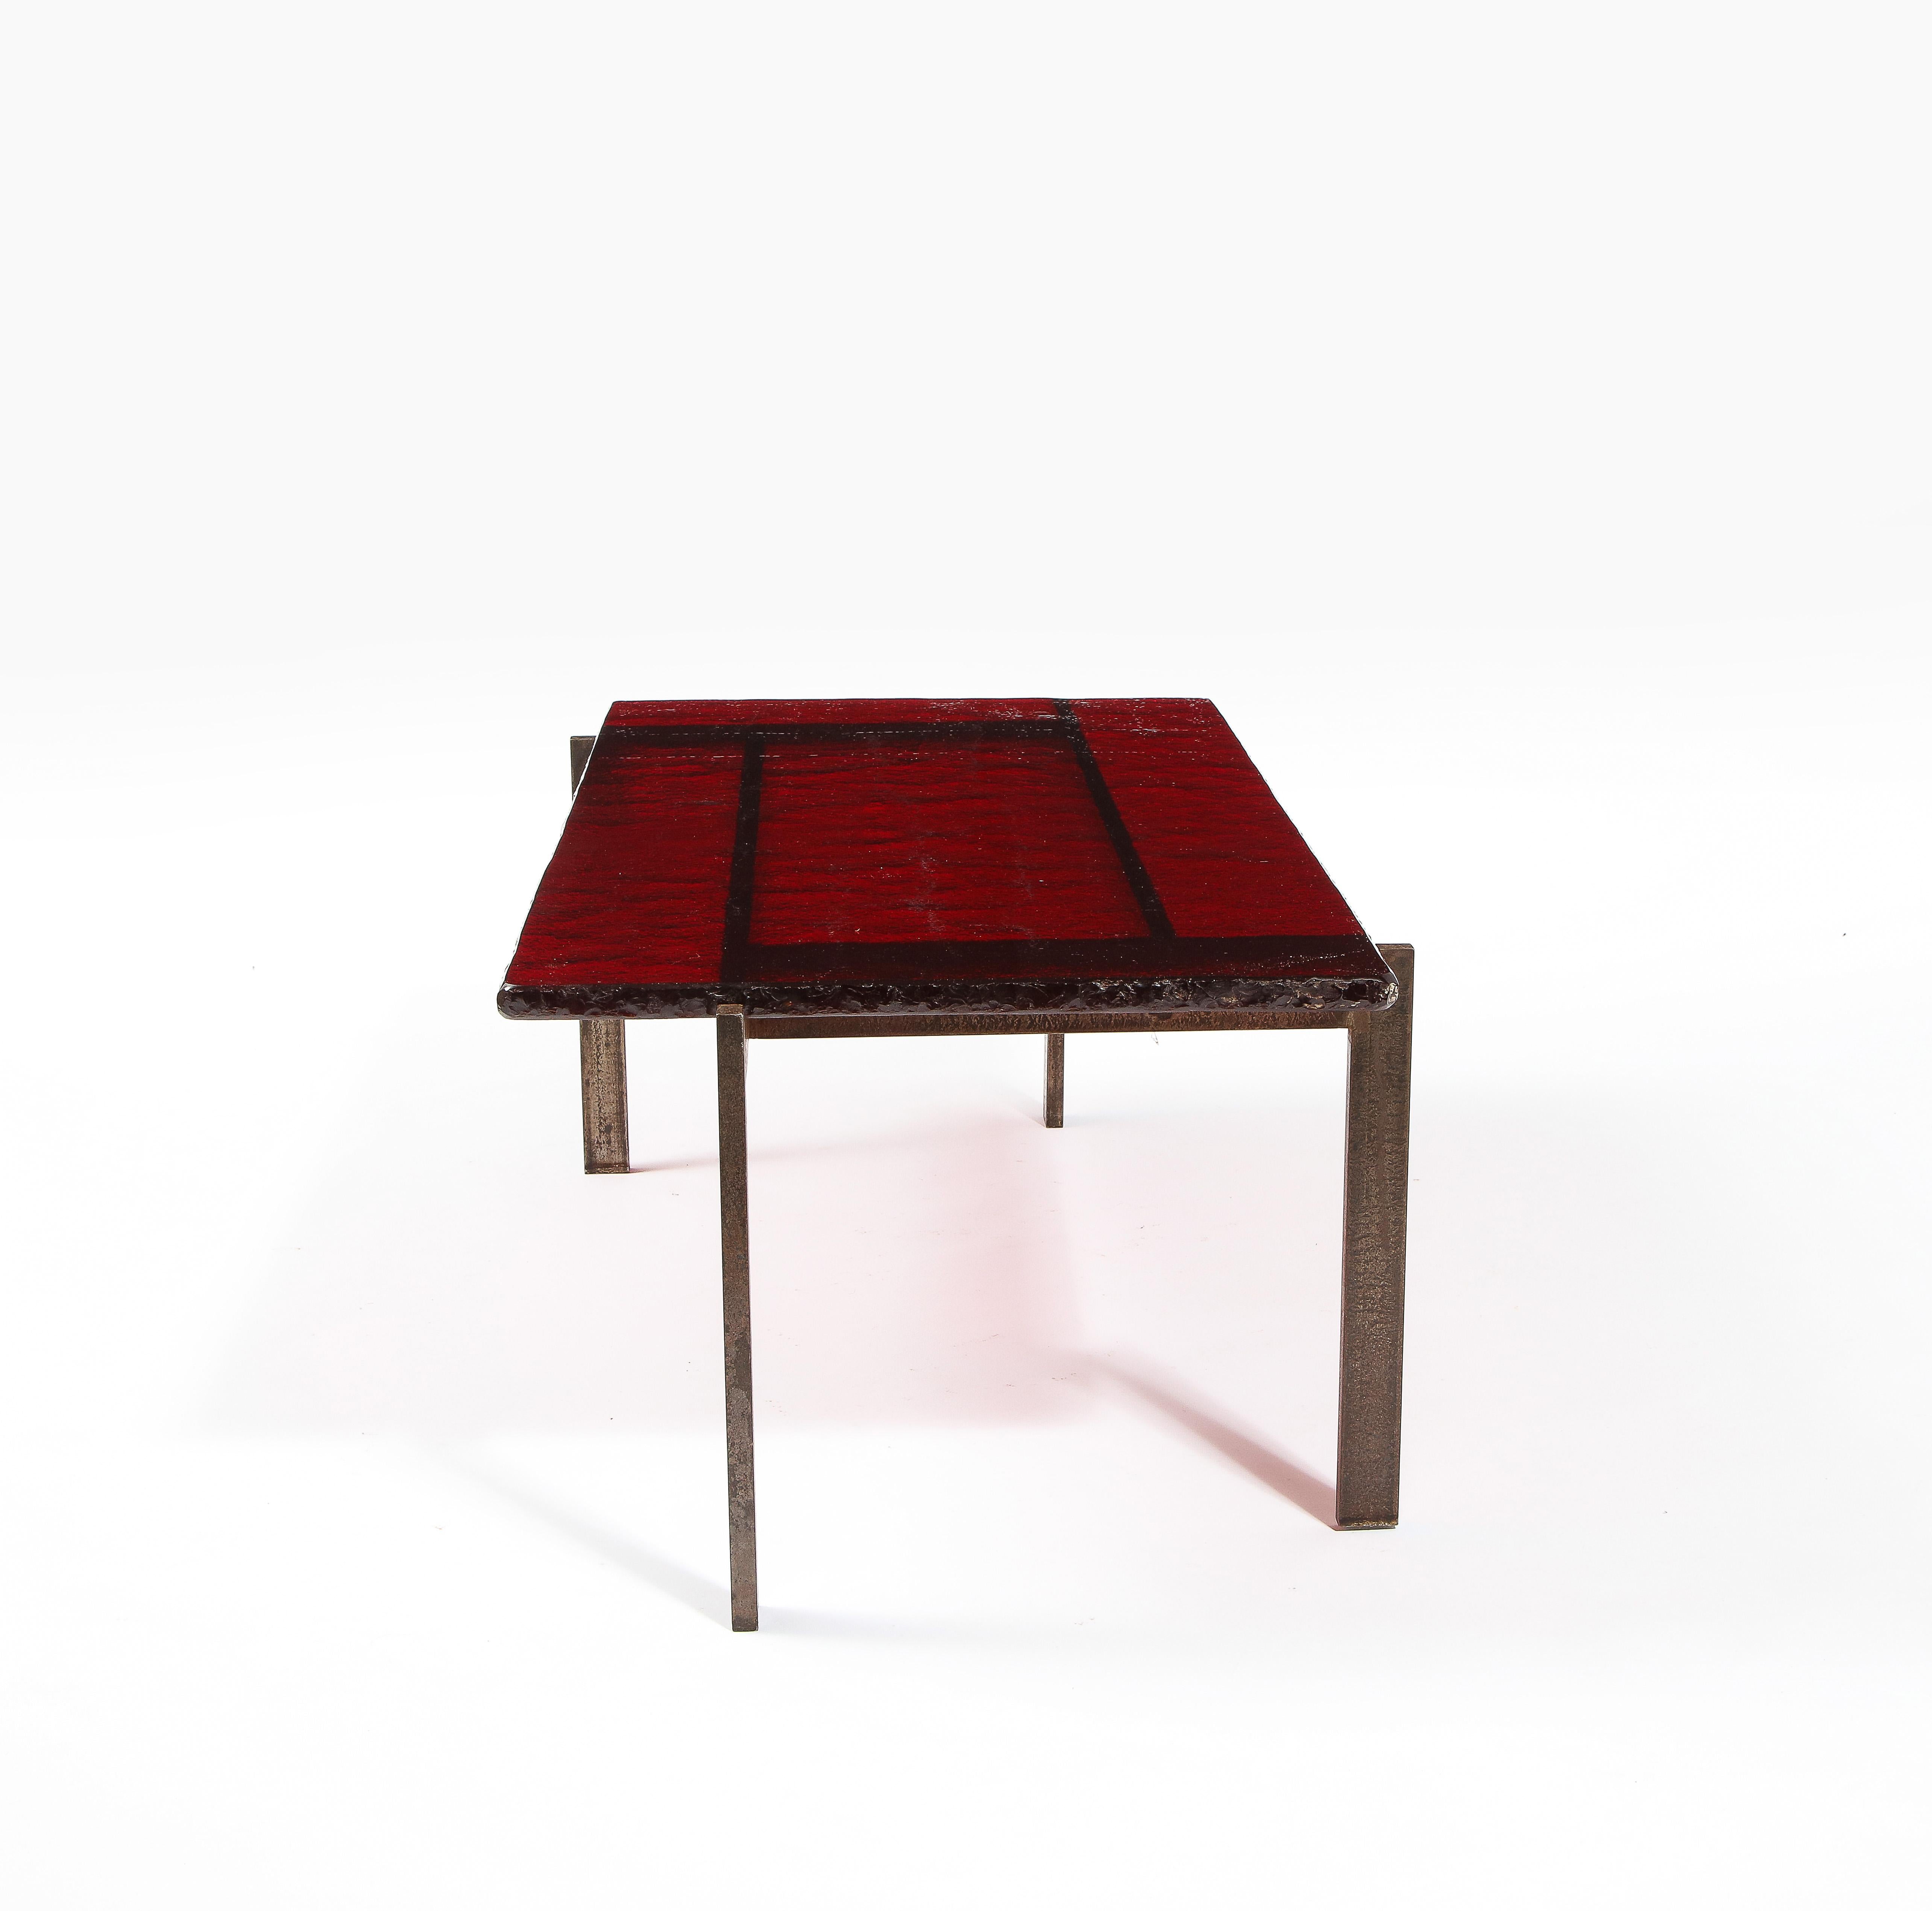 Ruby Red Saint Gobain Glass & Steel Modernist Coffee Table, France 1960's For Sale 4